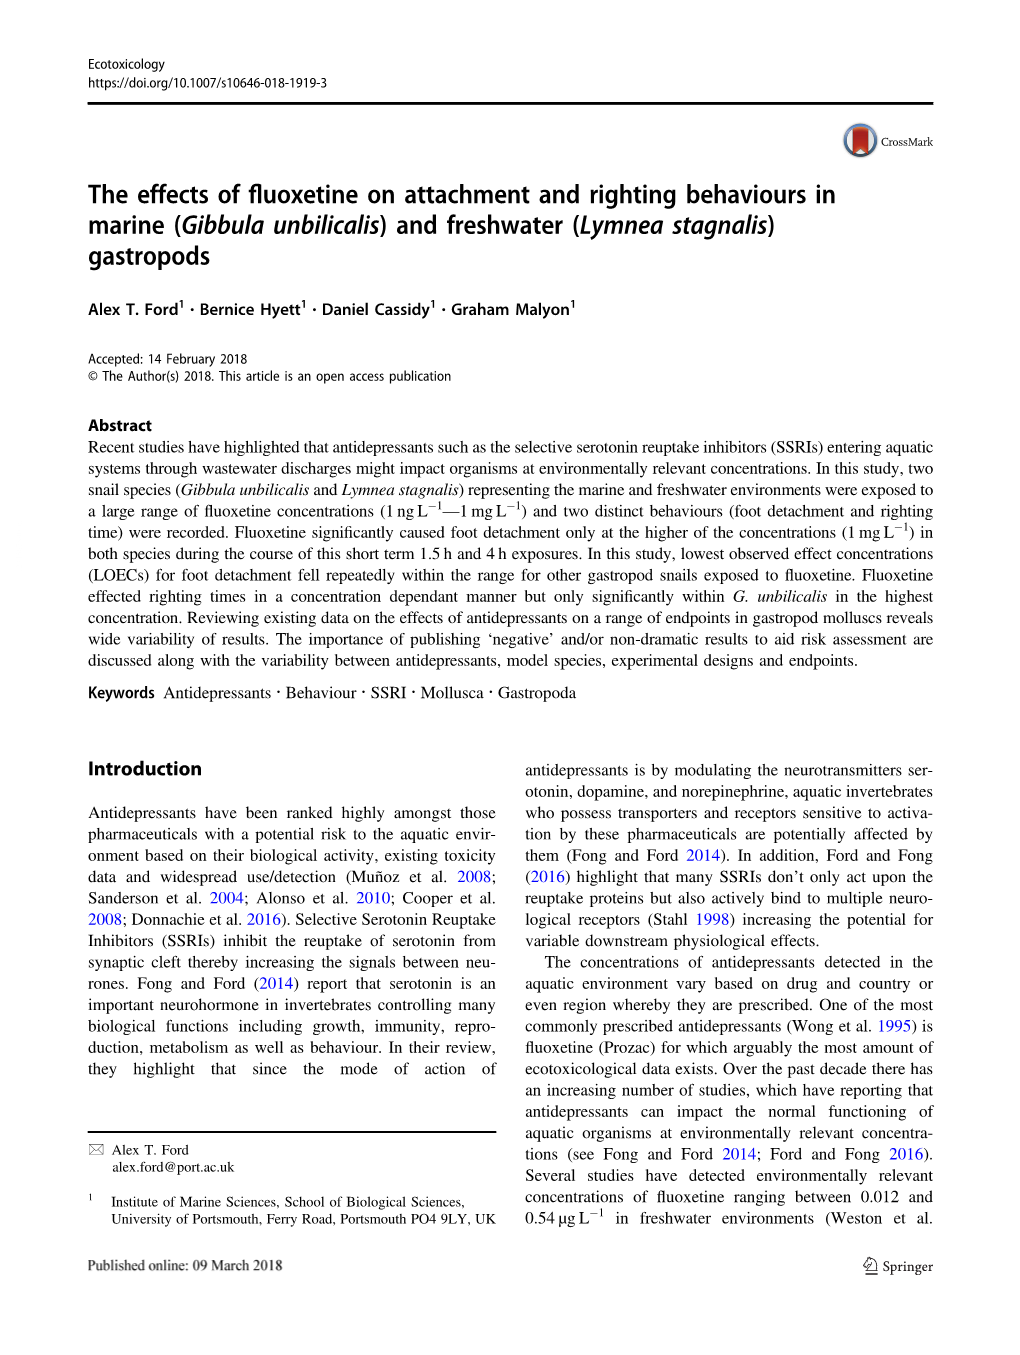 The Effects of Fluoxetine on Attachment and Righting Behaviours in Marine